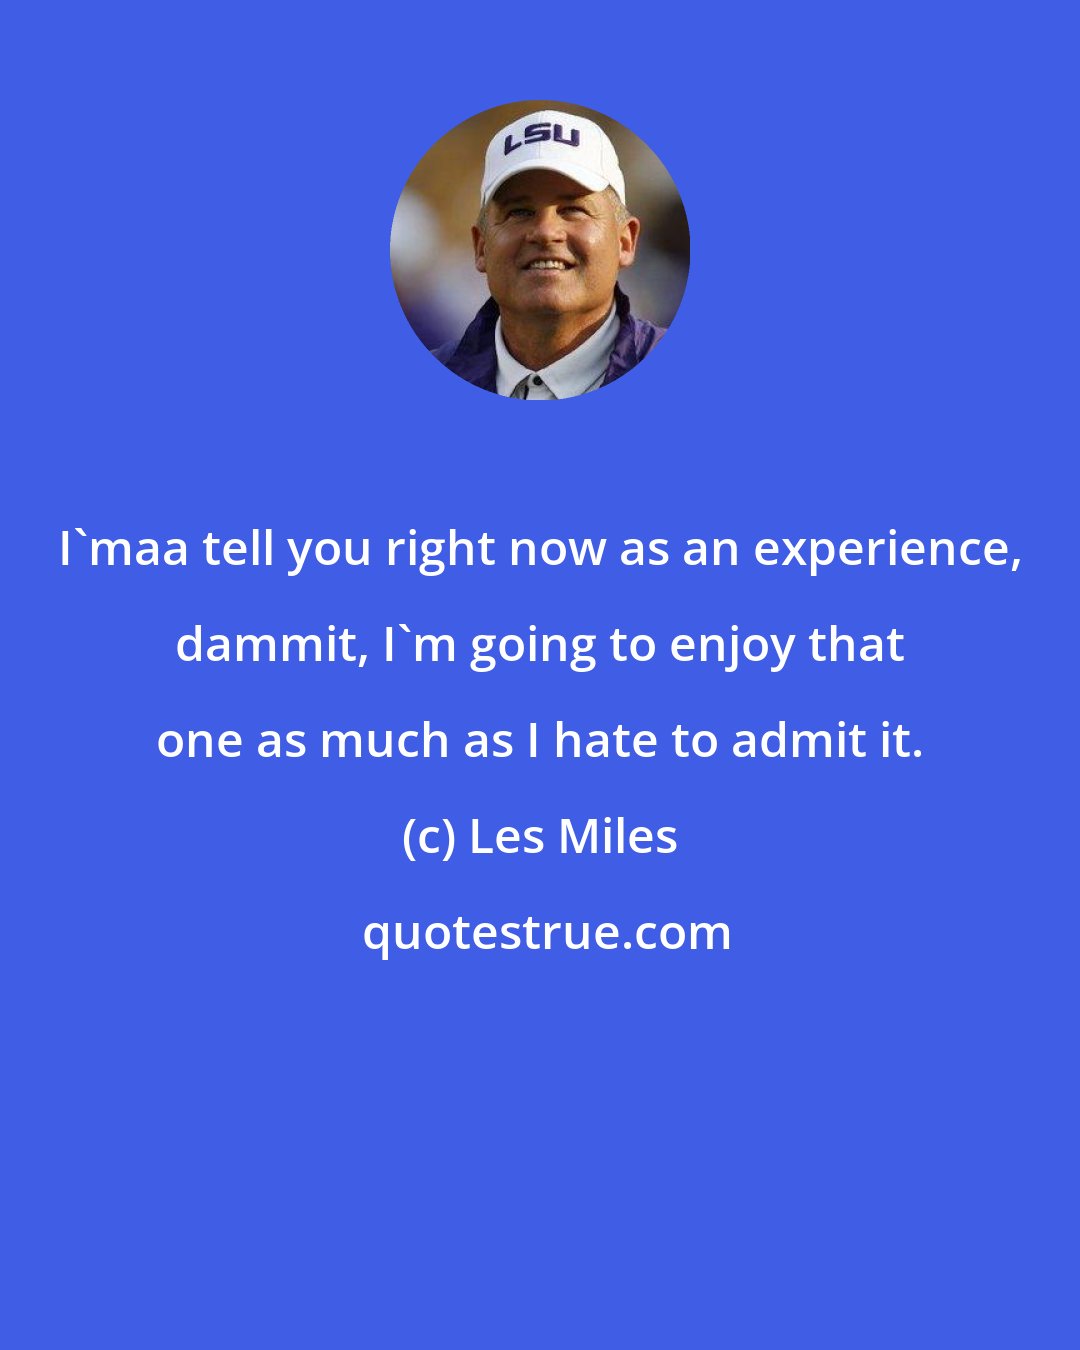 Les Miles: I'maa tell you right now as an experience, dammit, I'm going to enjoy that one as much as I hate to admit it.